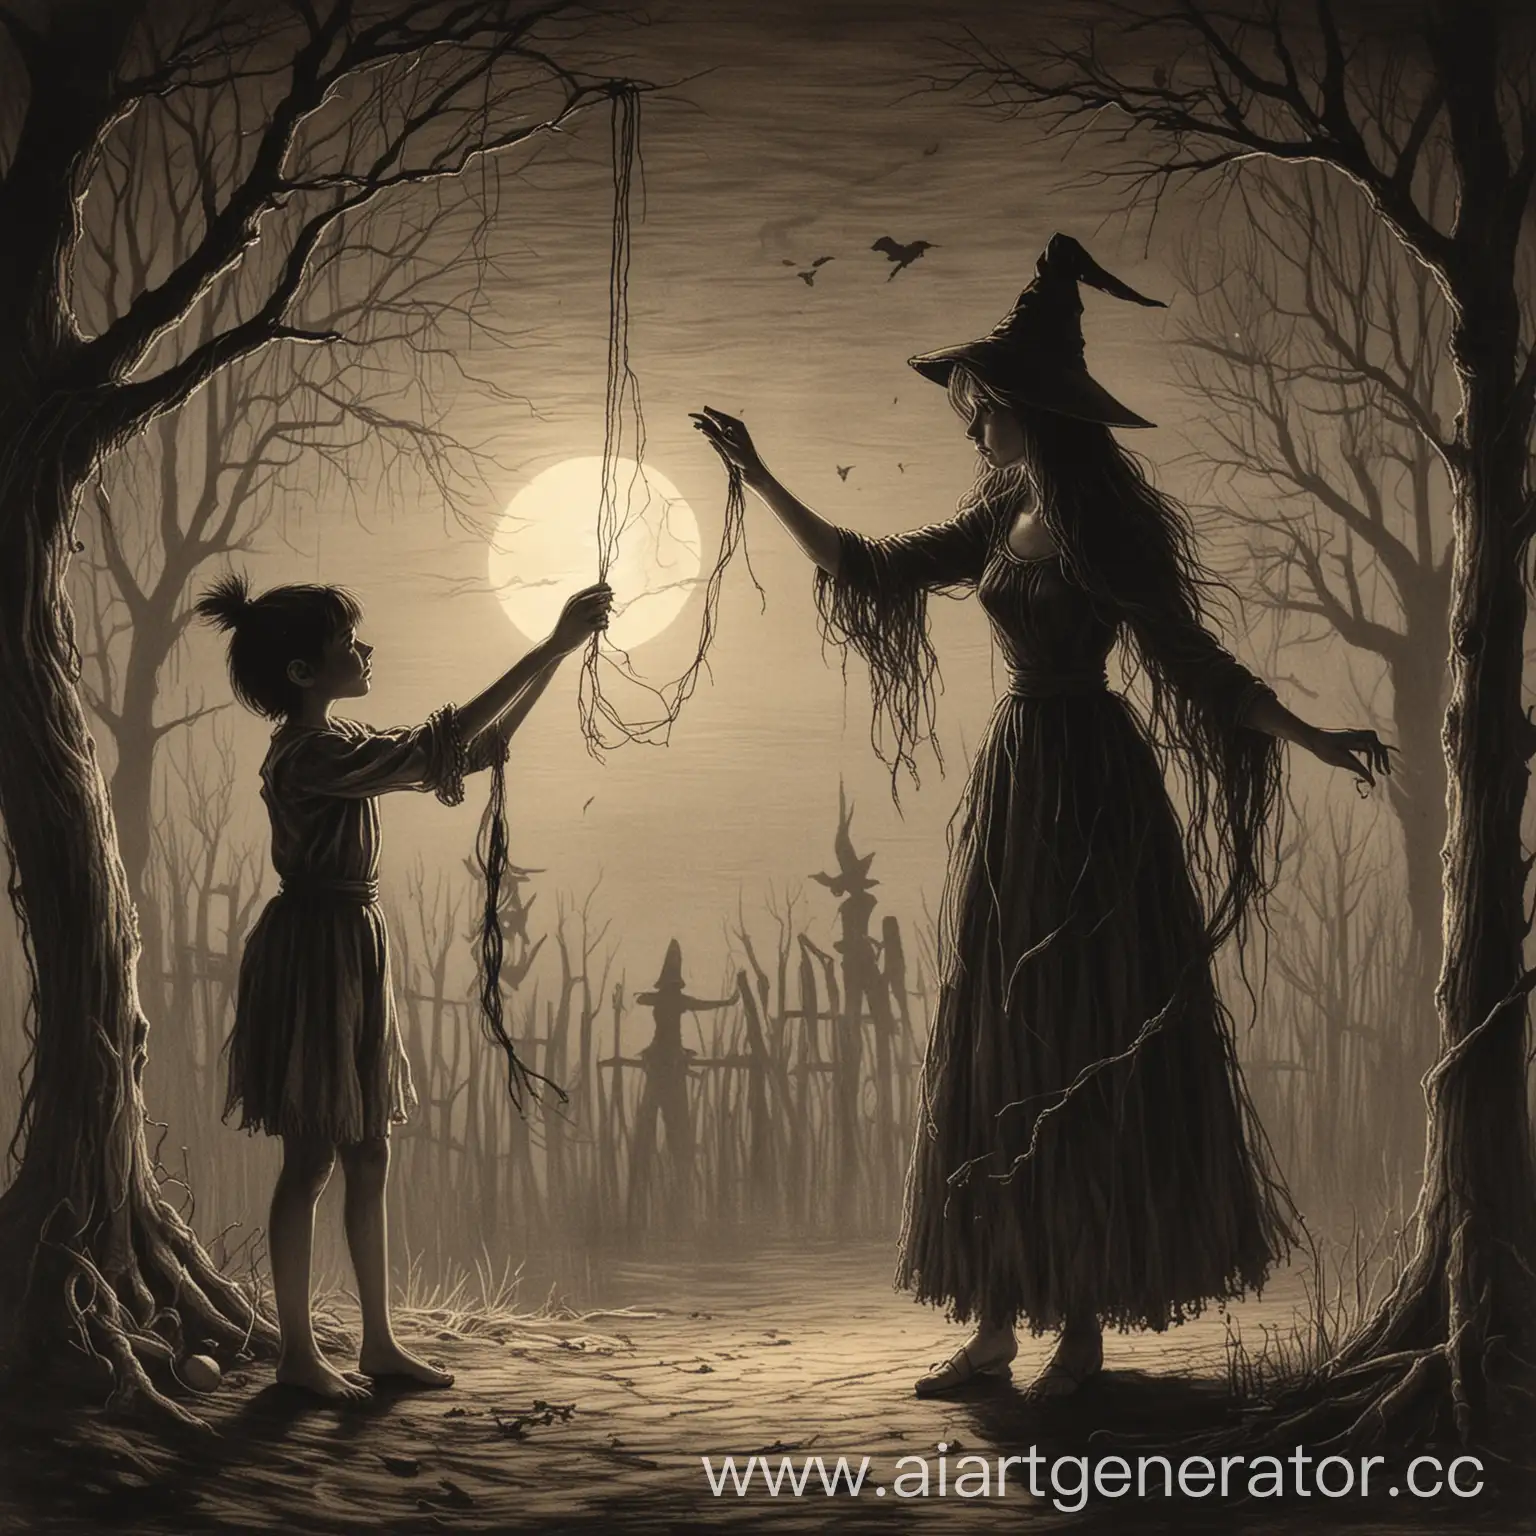 Witch-Holding-Thread-with-Hanging-Boy-in-Shadowy-Dance